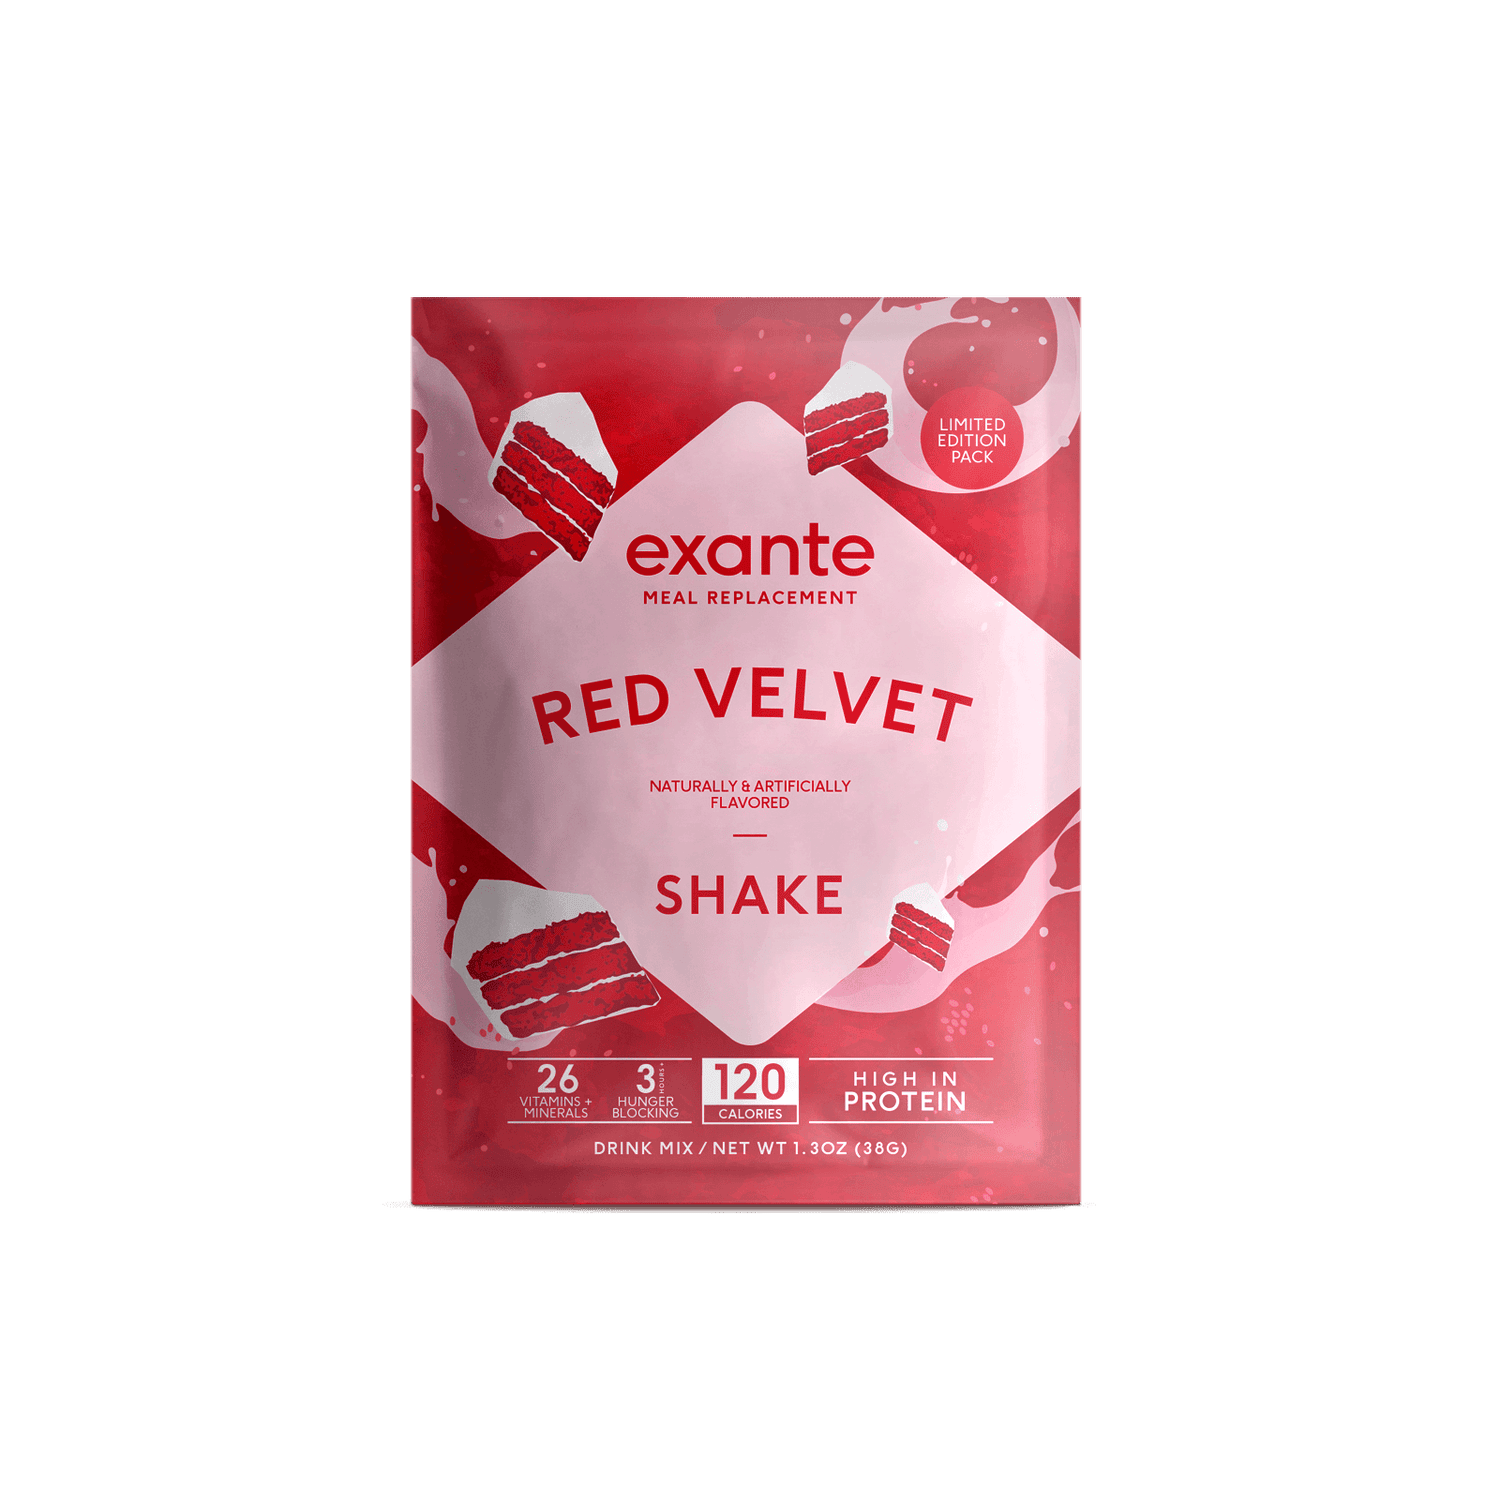 Red Velvet Meal Replacement Shake - Sample